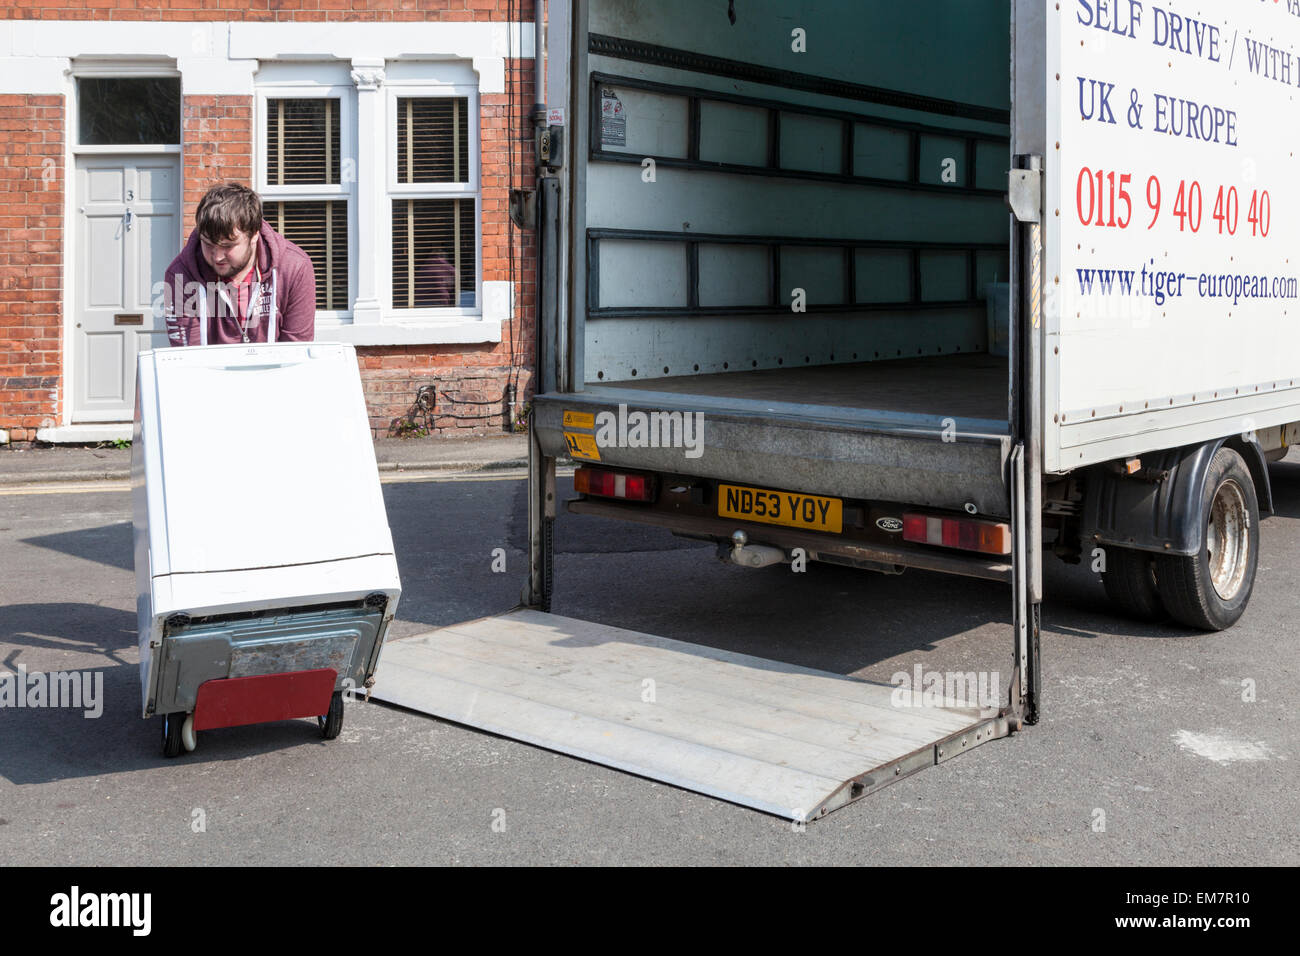 Moving house. A man loading white goods onto a tail lift of a hired self drive van, England, UK Stock Photo